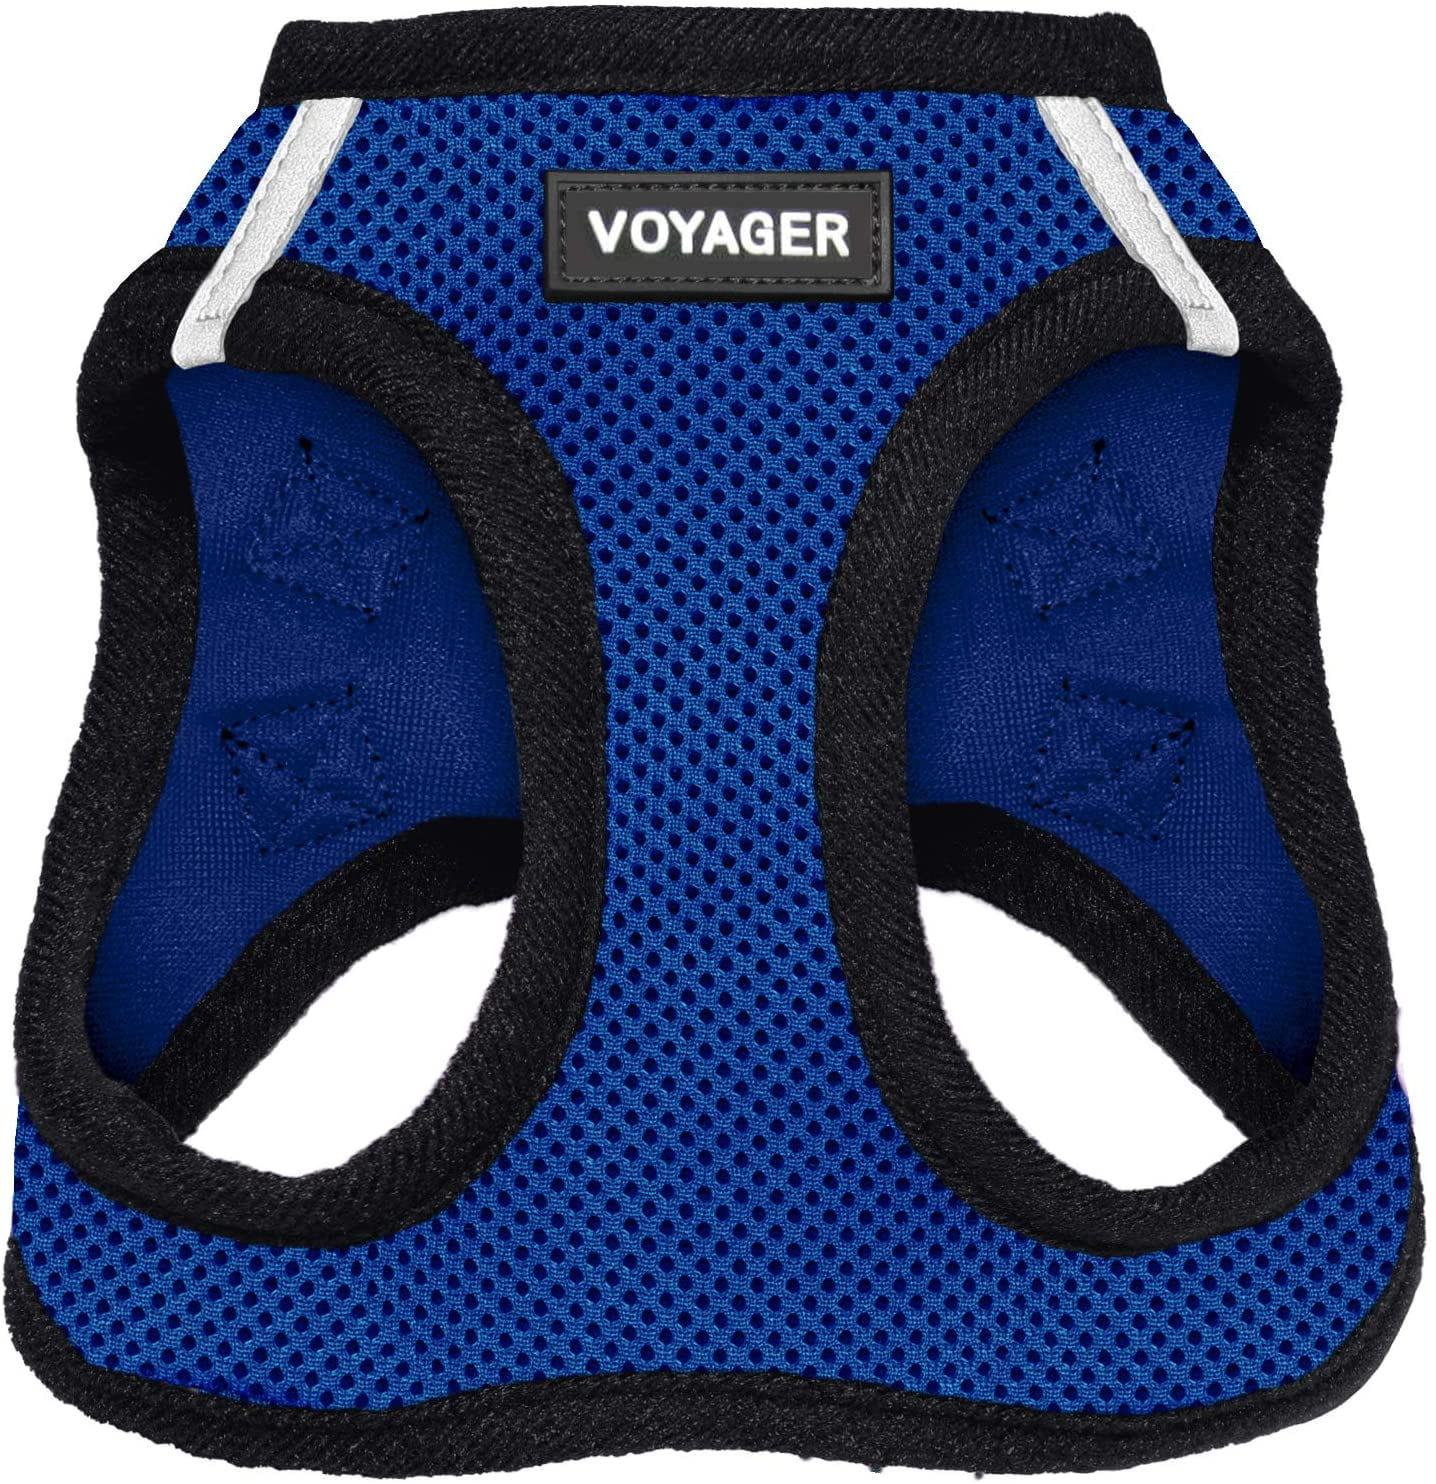 Voyager Step-In Air Dog Harness Step In Vest Harness for Small and Medium Dogs by Best Pet Supplies All Weather Mesh